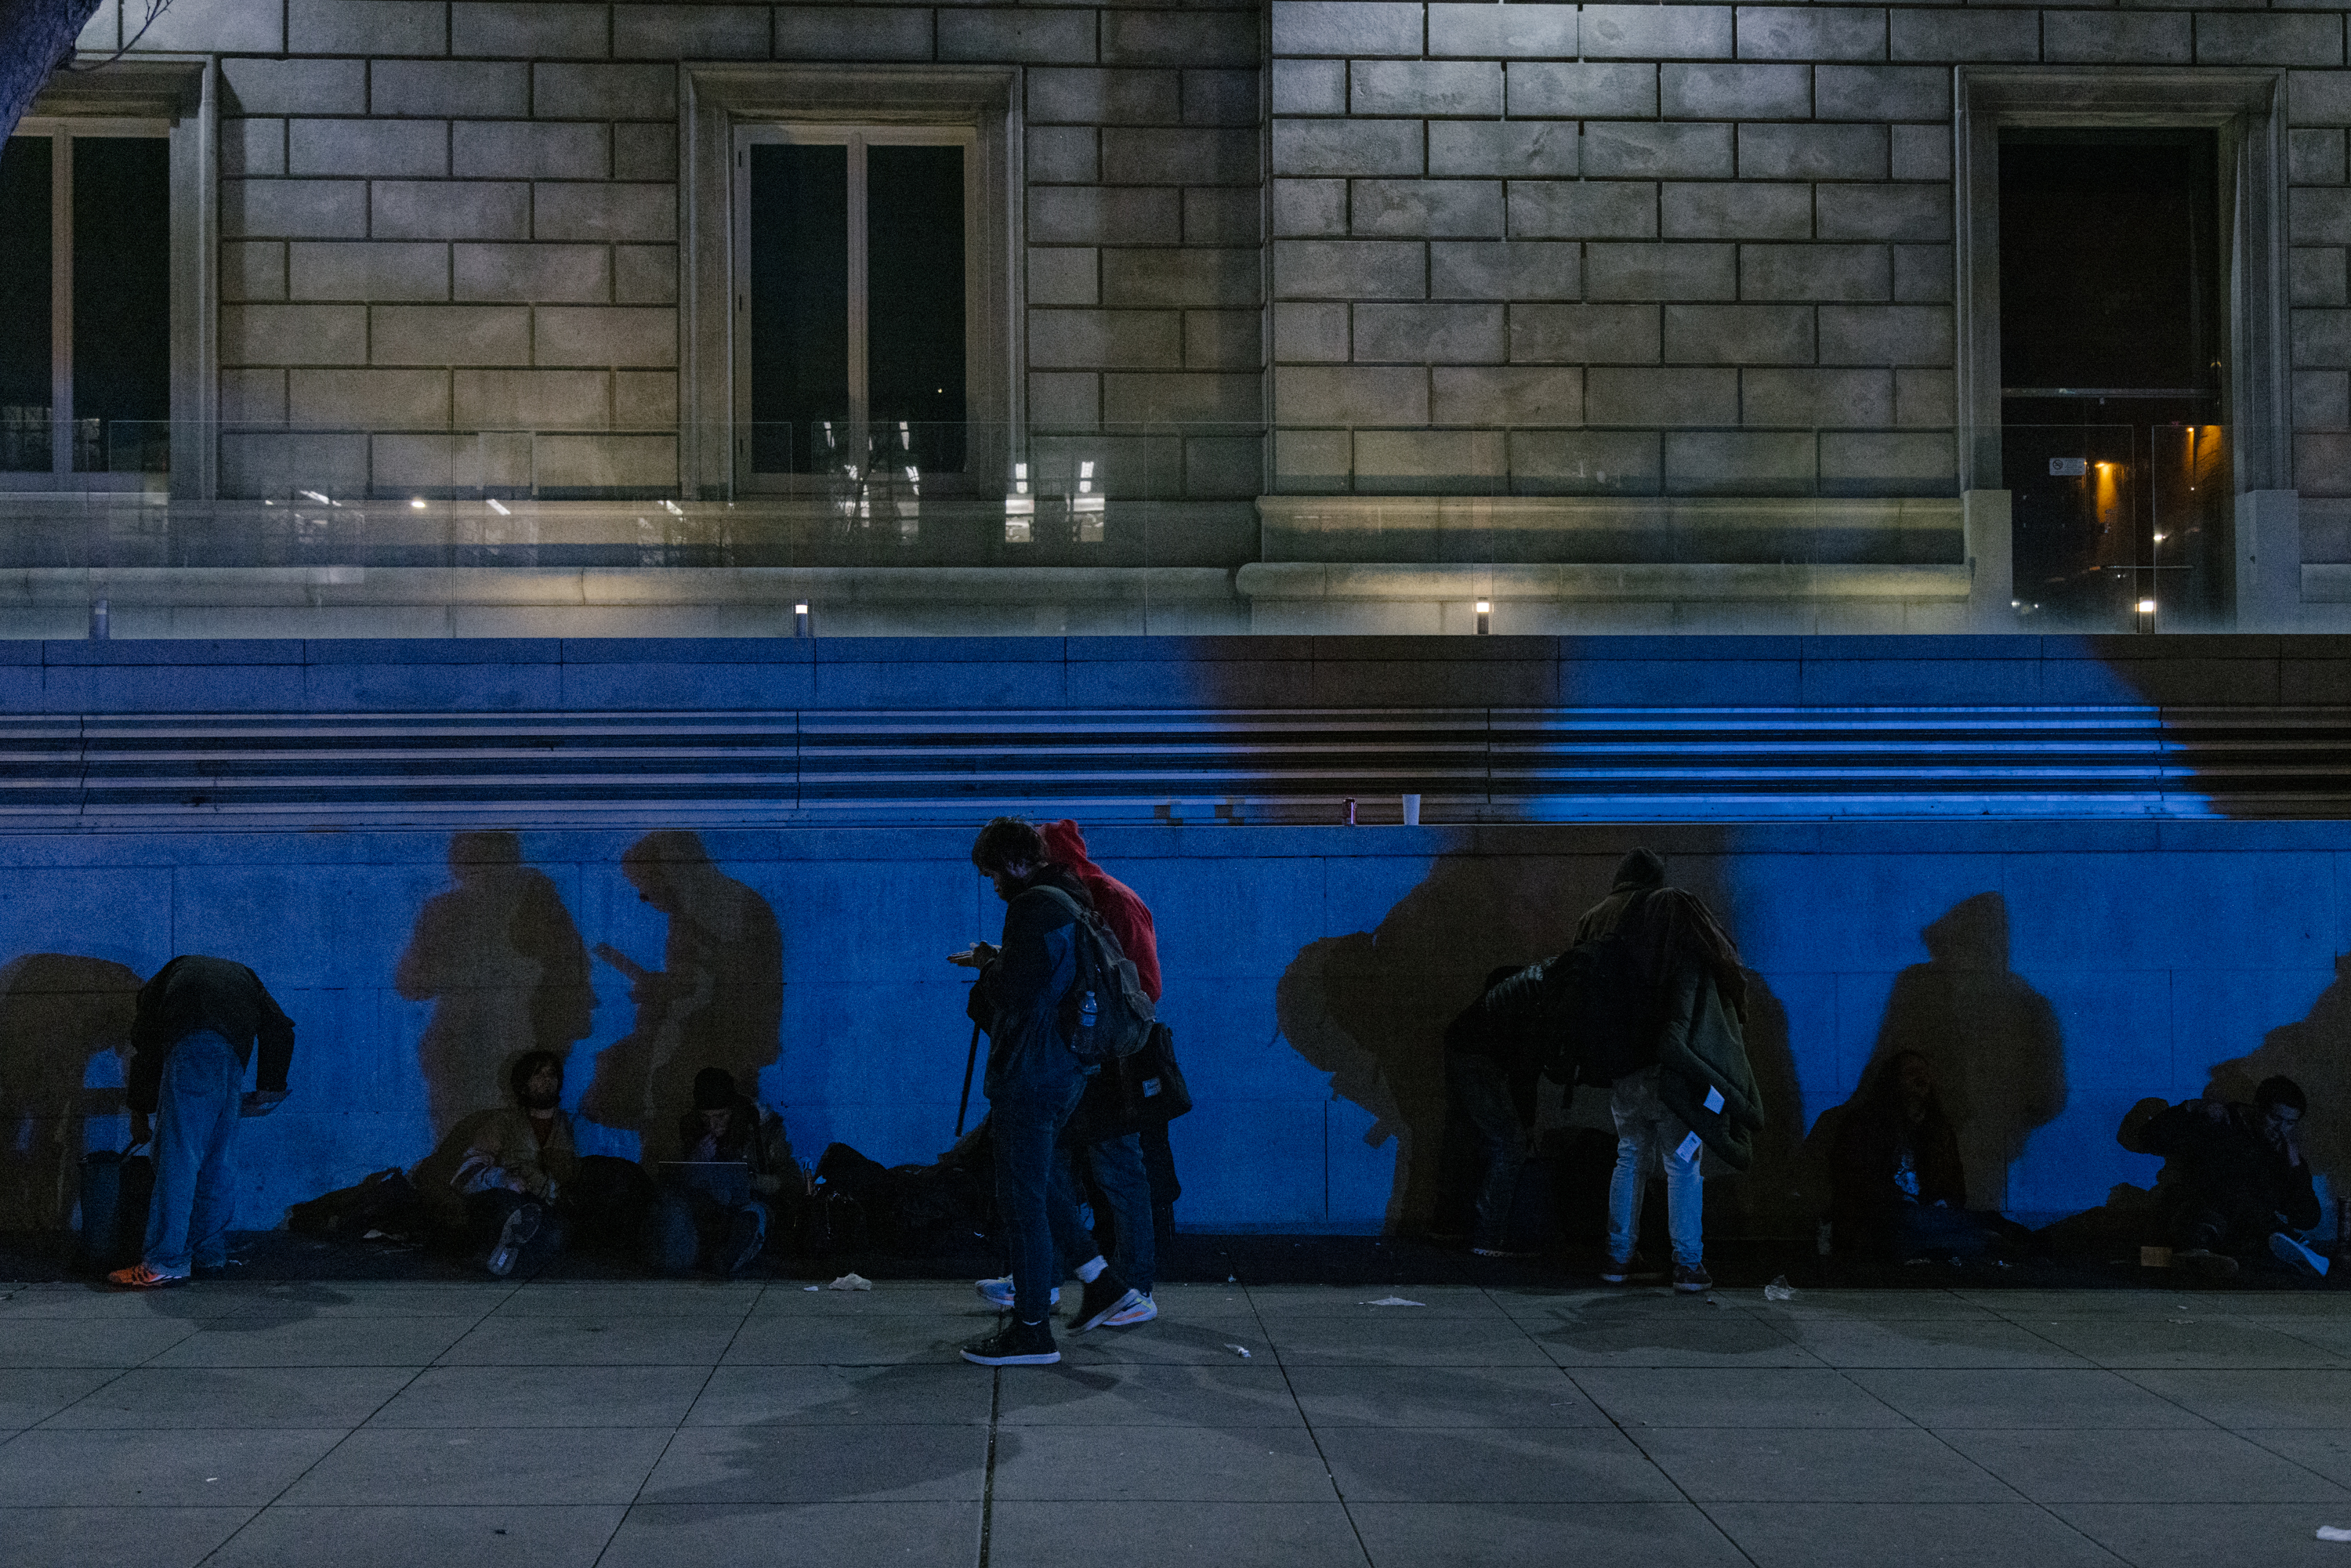 People casting shadows on a blue-lit building wall at night; some are seated, one stands using a phone.